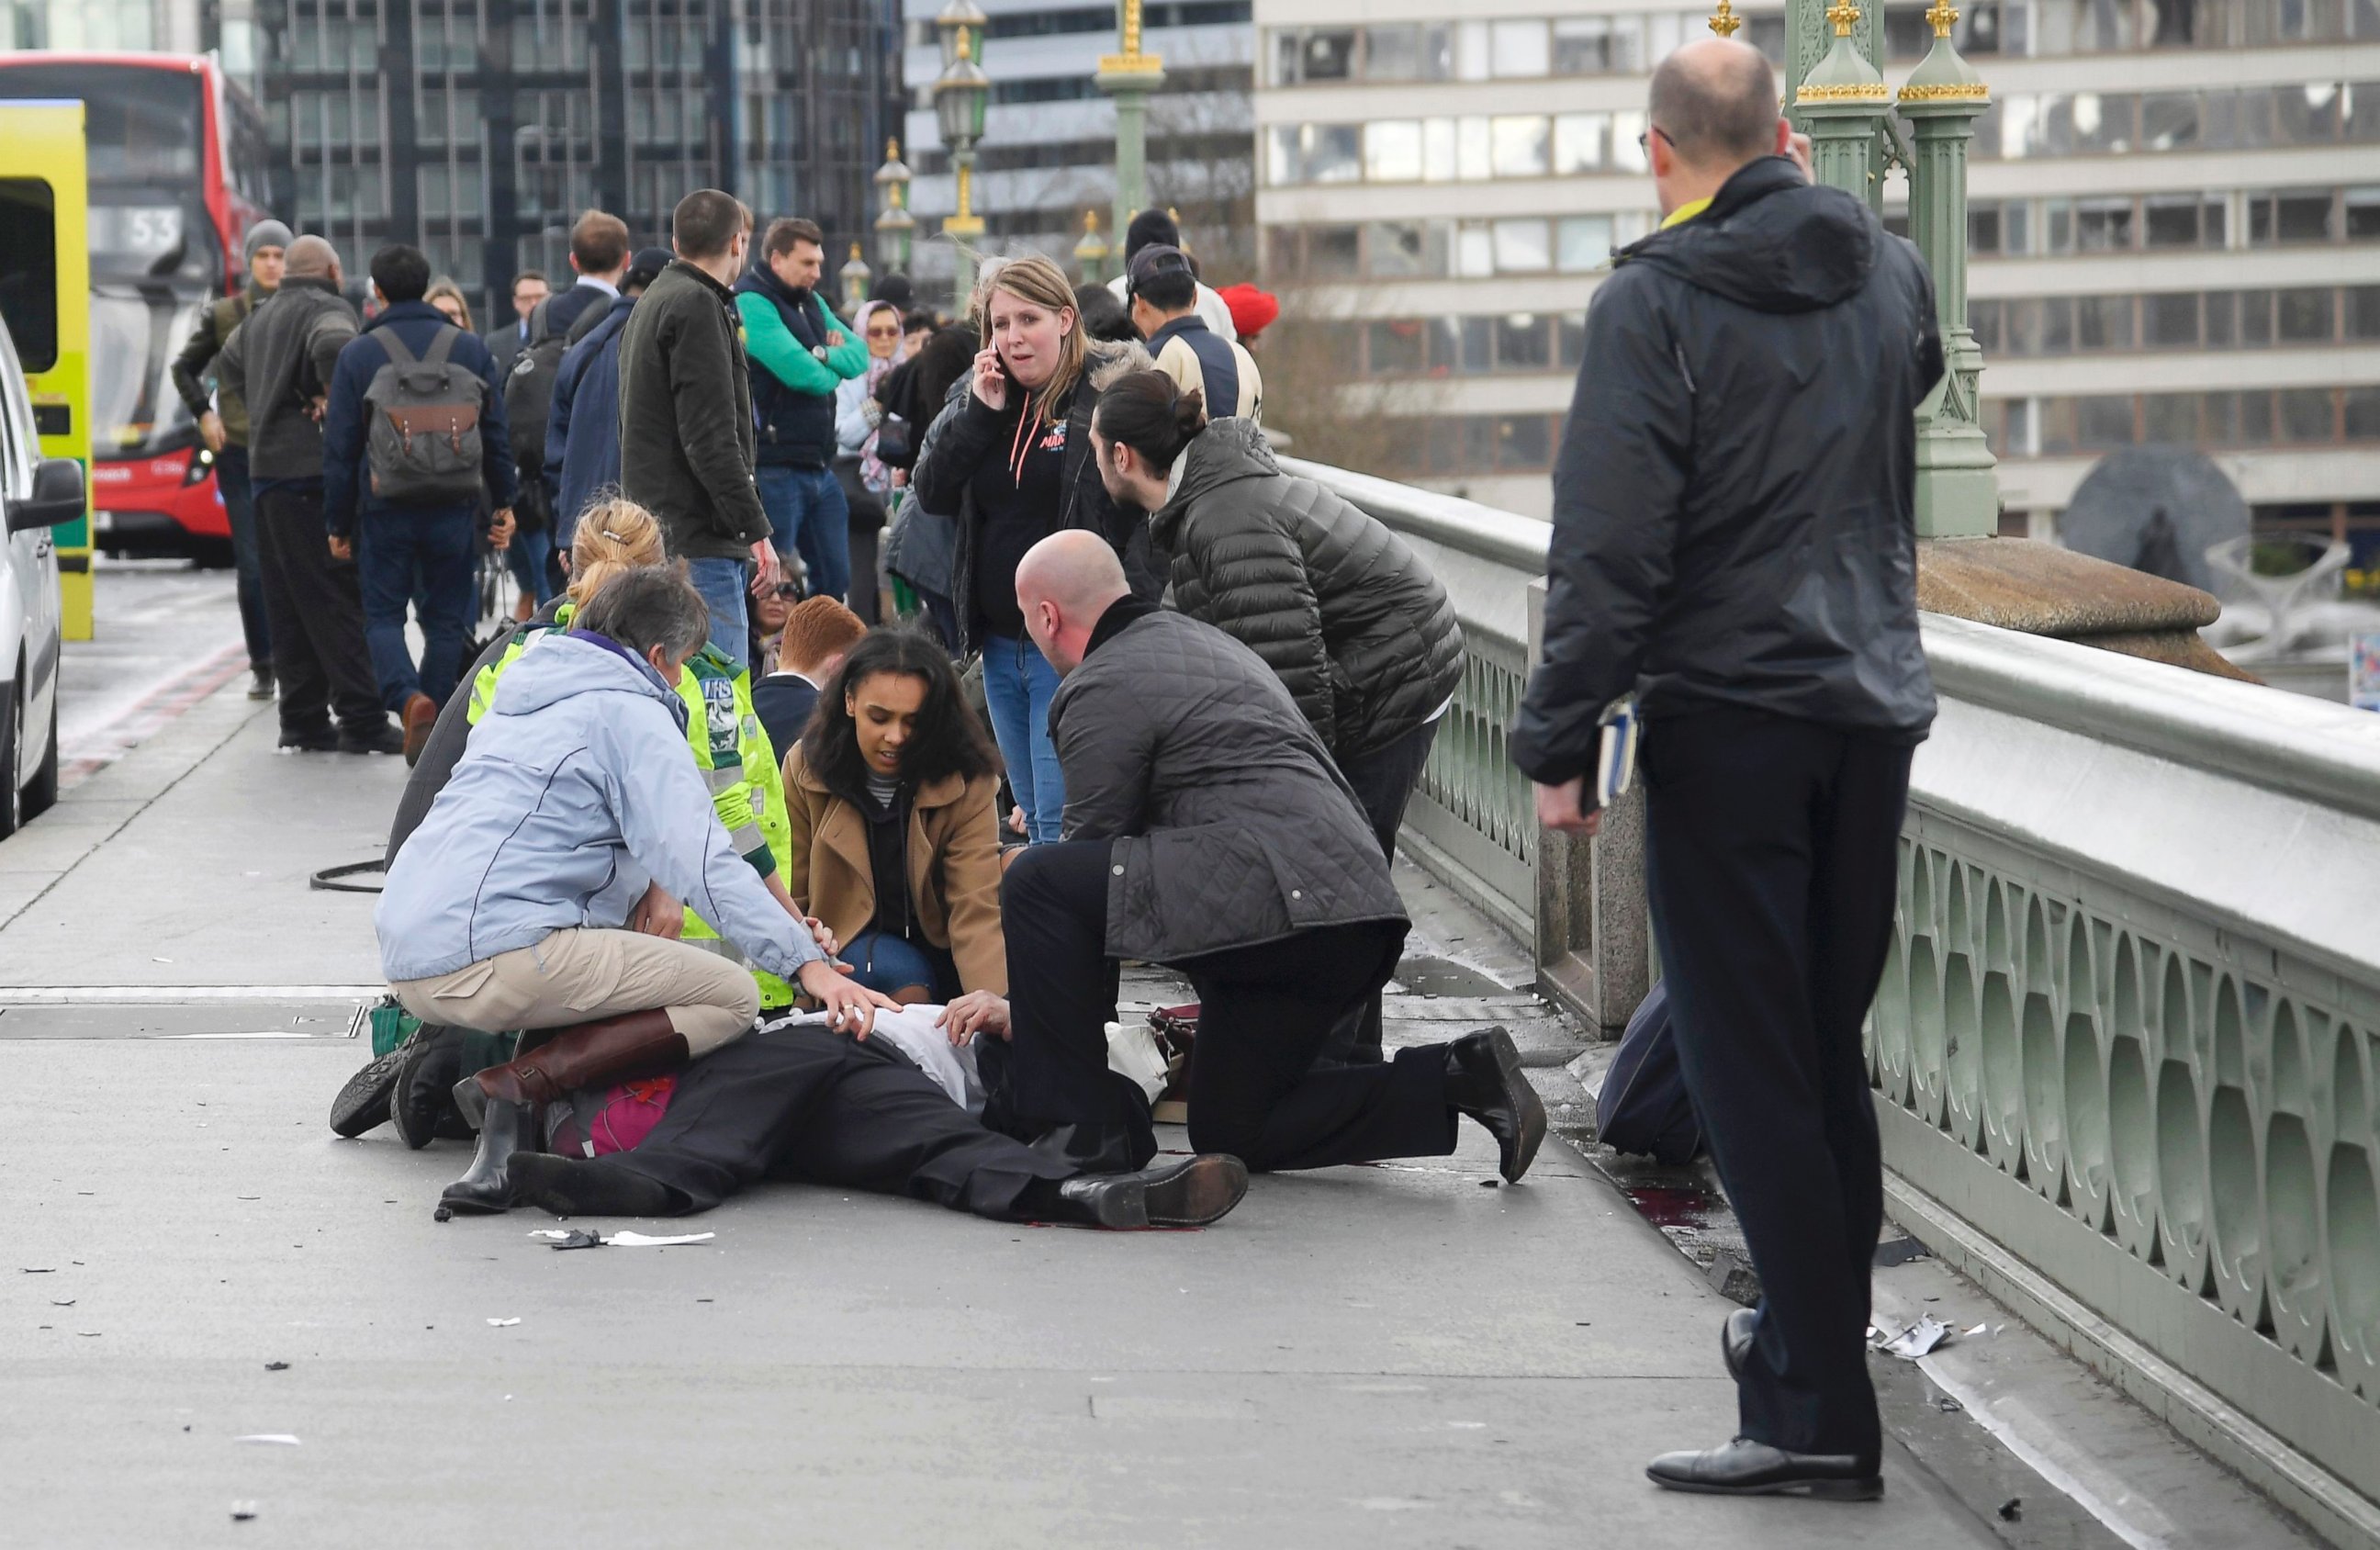 PHOTO: Injured people are assisted after an incident on Westminster Bridge in London, March 22, 2017.